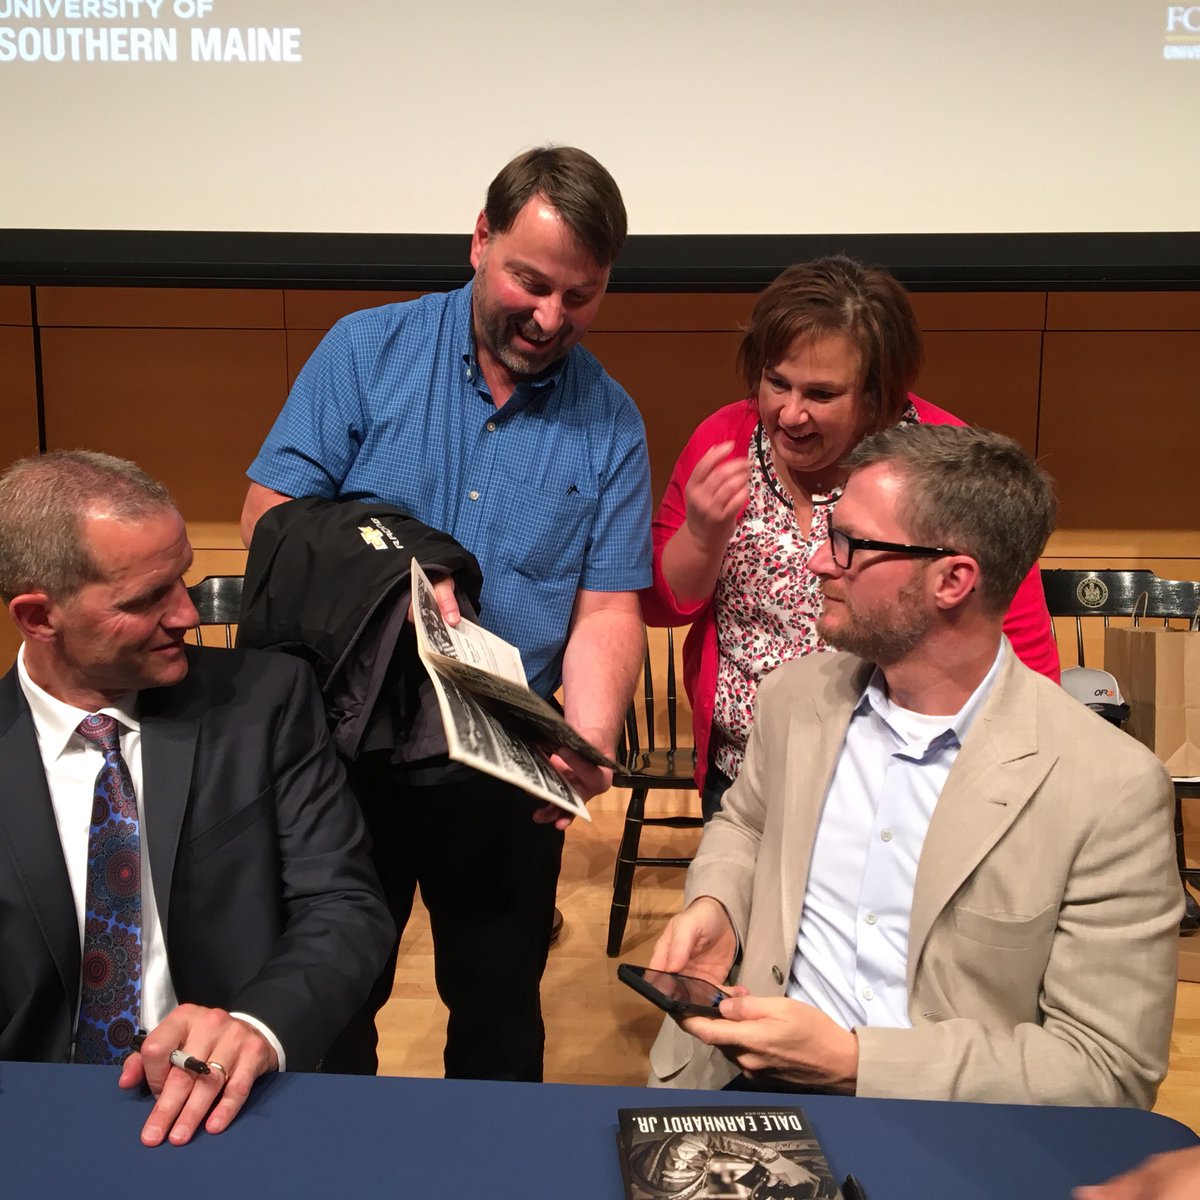 Had a great time meeting @DaleJr at @USouthernMaine . Gave him some @beechridge programs from 1982. Had pics of @SteveLetarte’s dad and @sneakypgr.